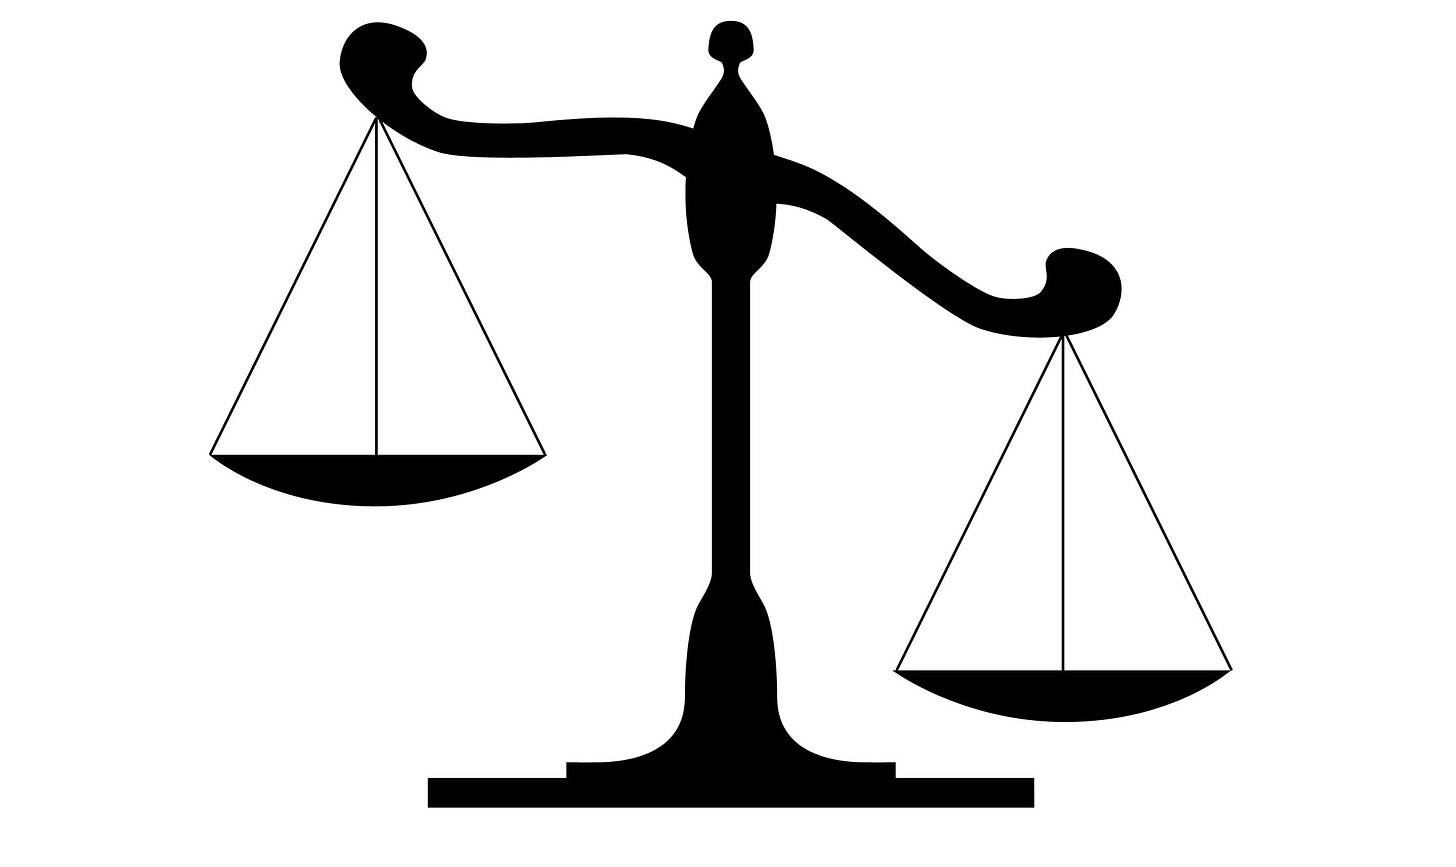 tilted justice scales | We the Governed